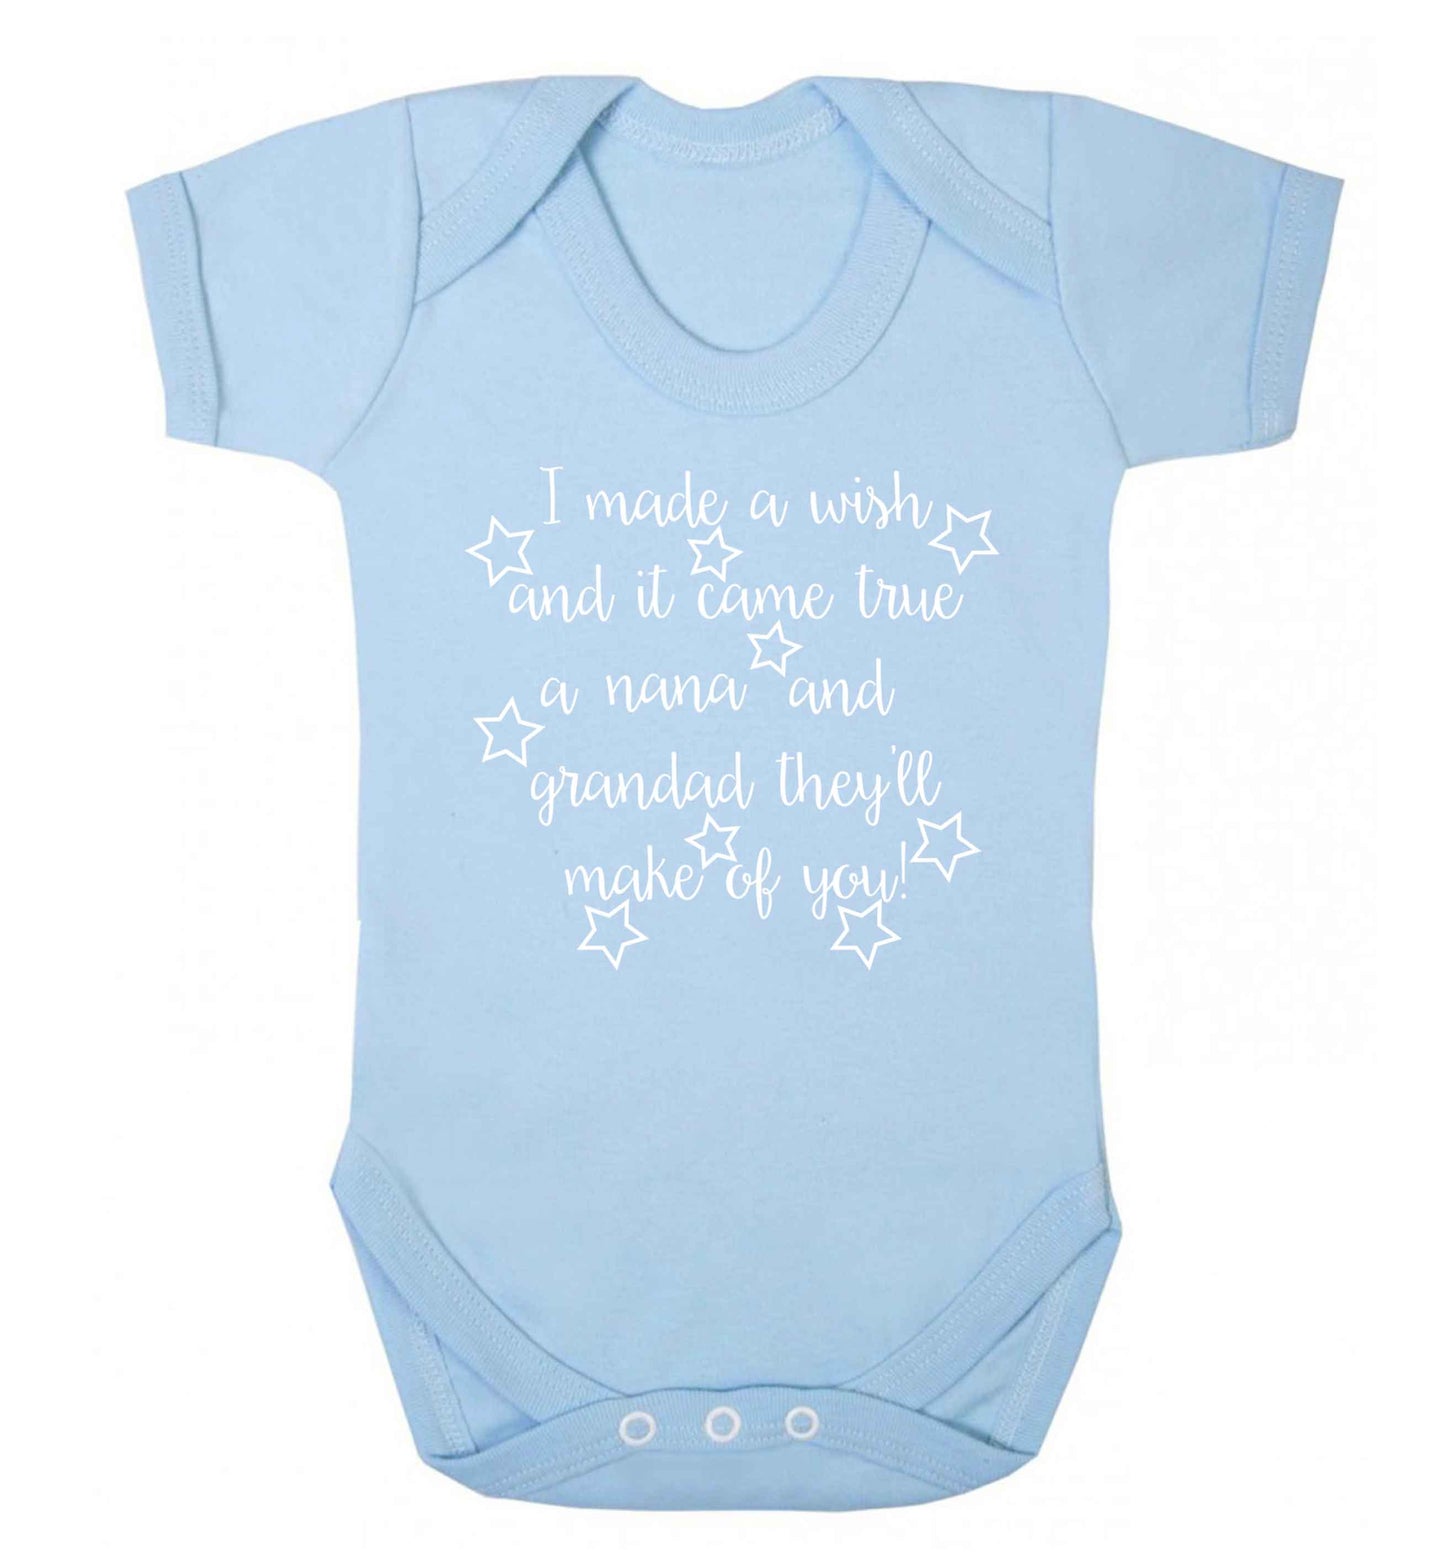 I made a wish and it came true a nana and grandad they'll make of you! Baby Vest pale blue 18-24 months